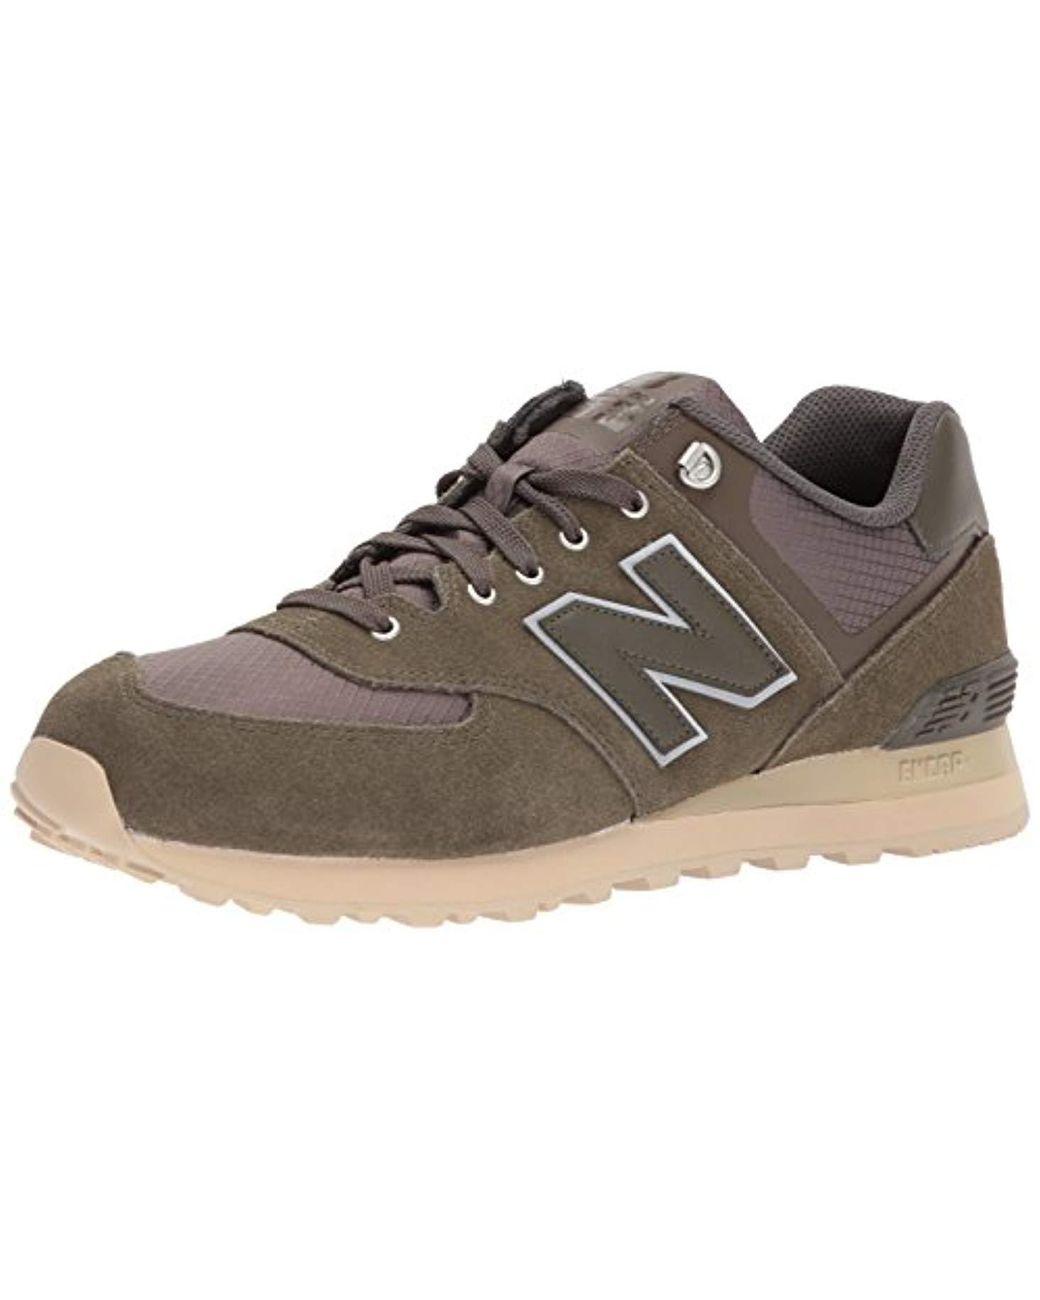 New Balance Suede 574v1 Sneaker in Purple for Men - Save 20% - Lyst